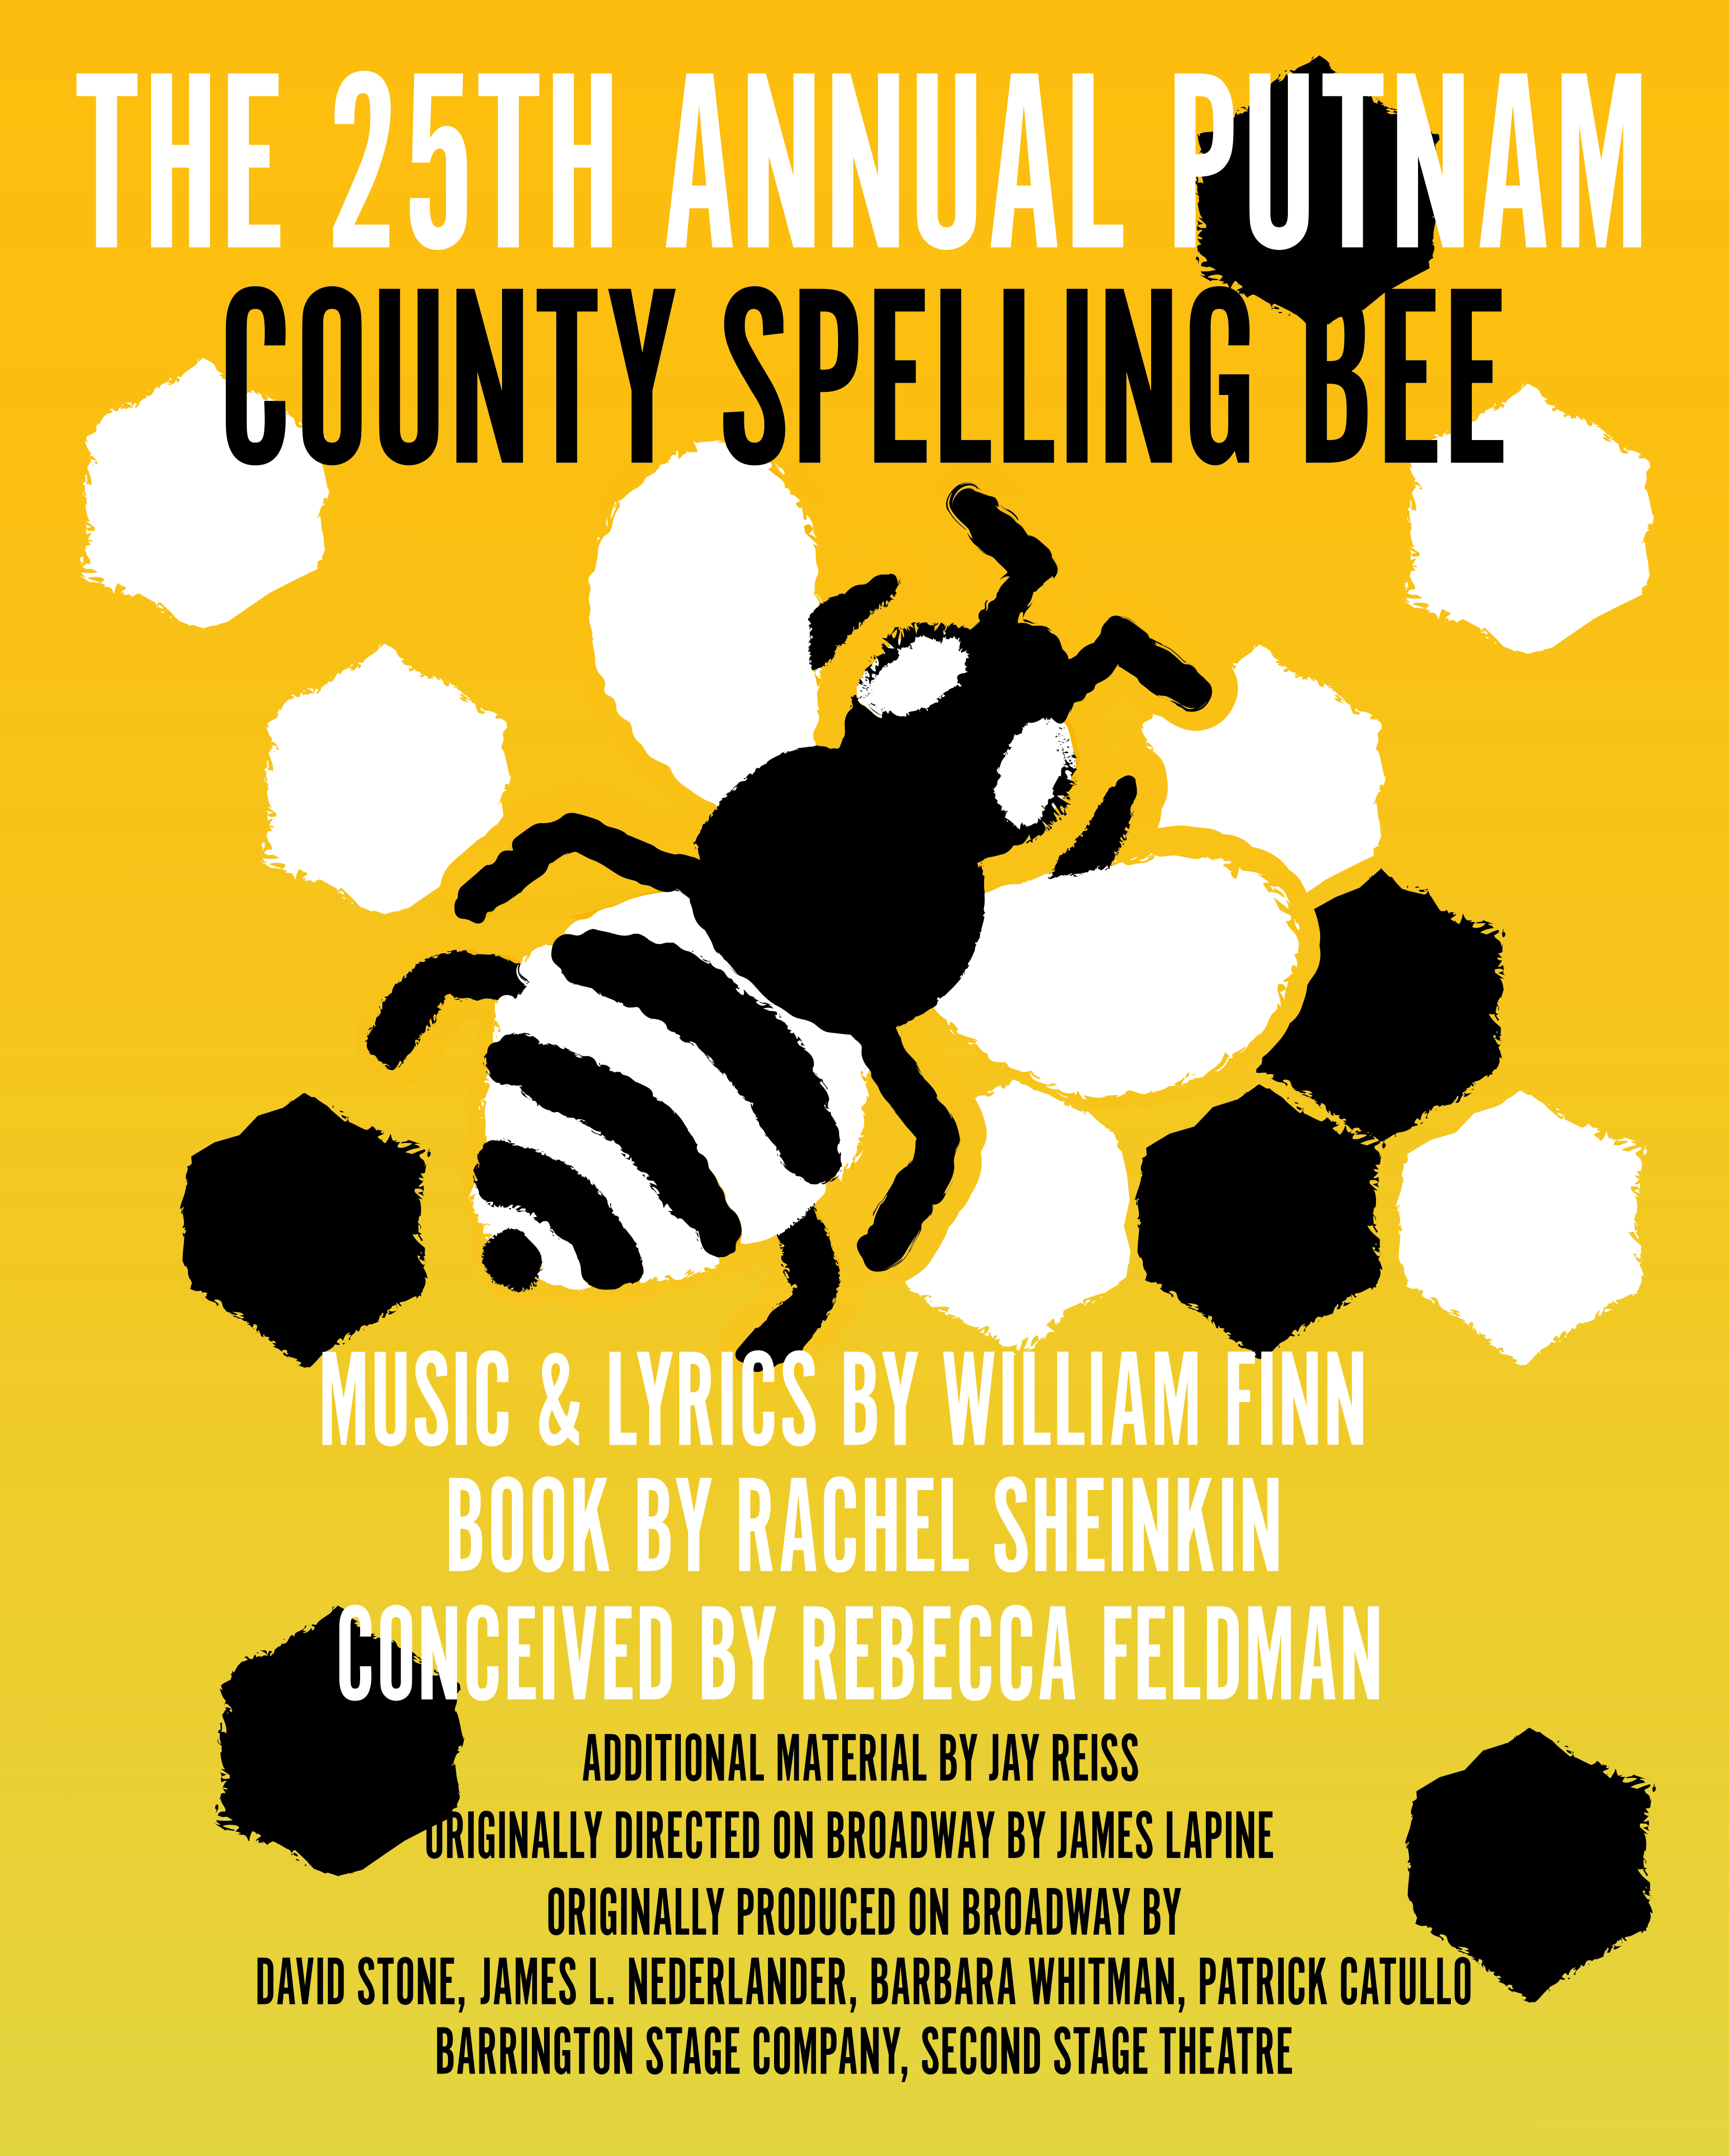 Spelling Bee show poster